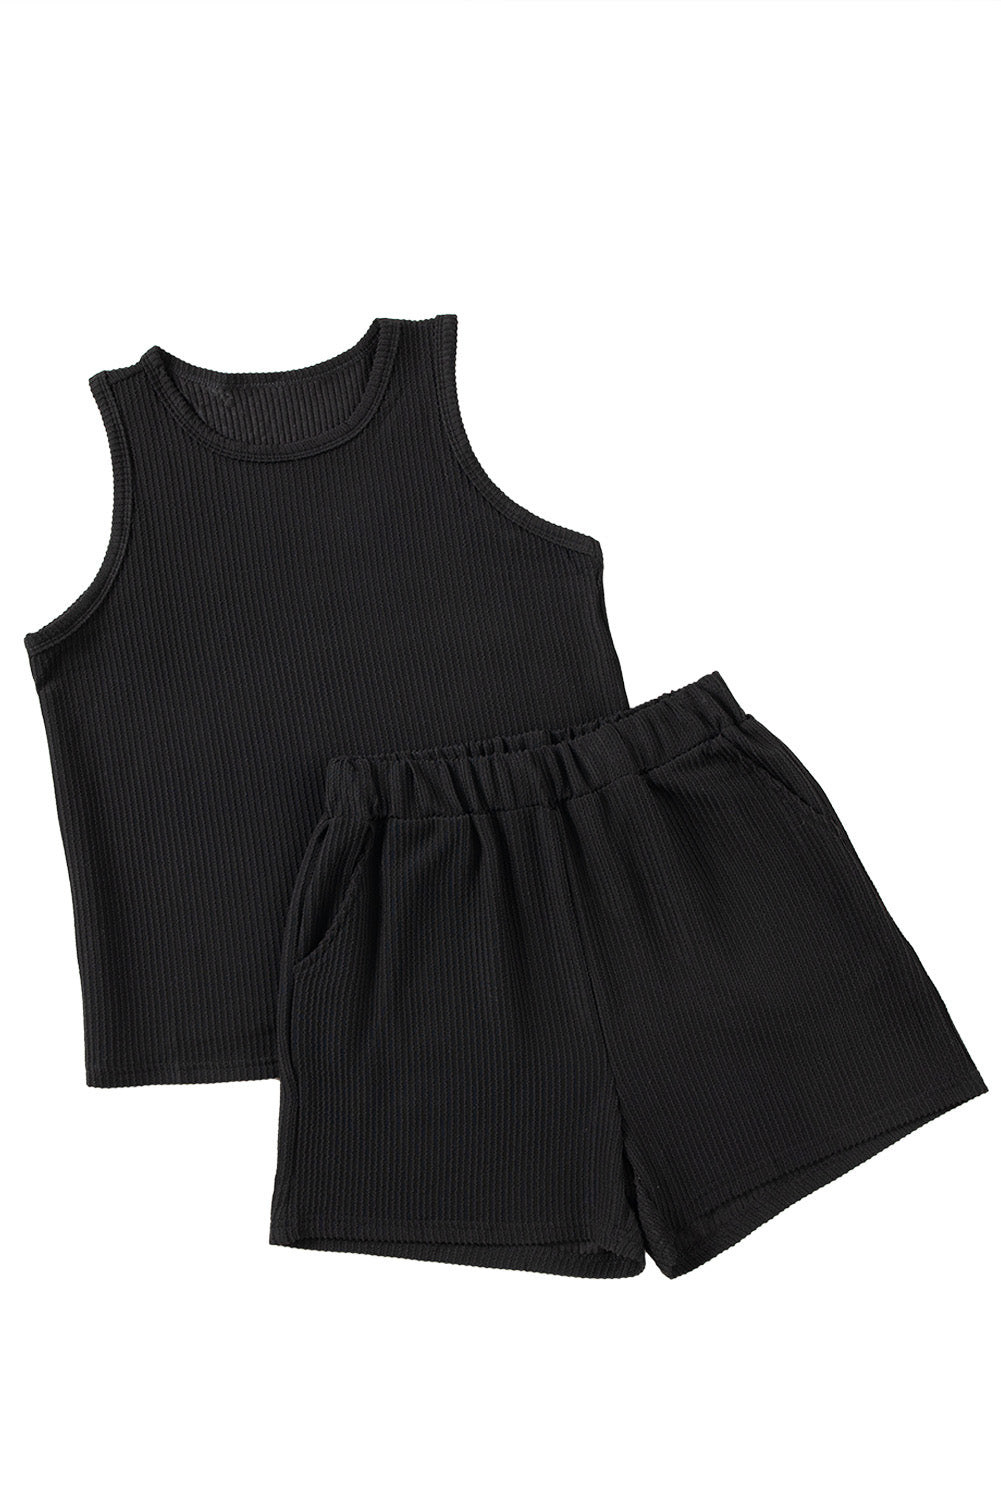 Black Corded Sleeveless Top and Pocketed Shorts Set Pre Order Bottoms JT's Designer Fashion